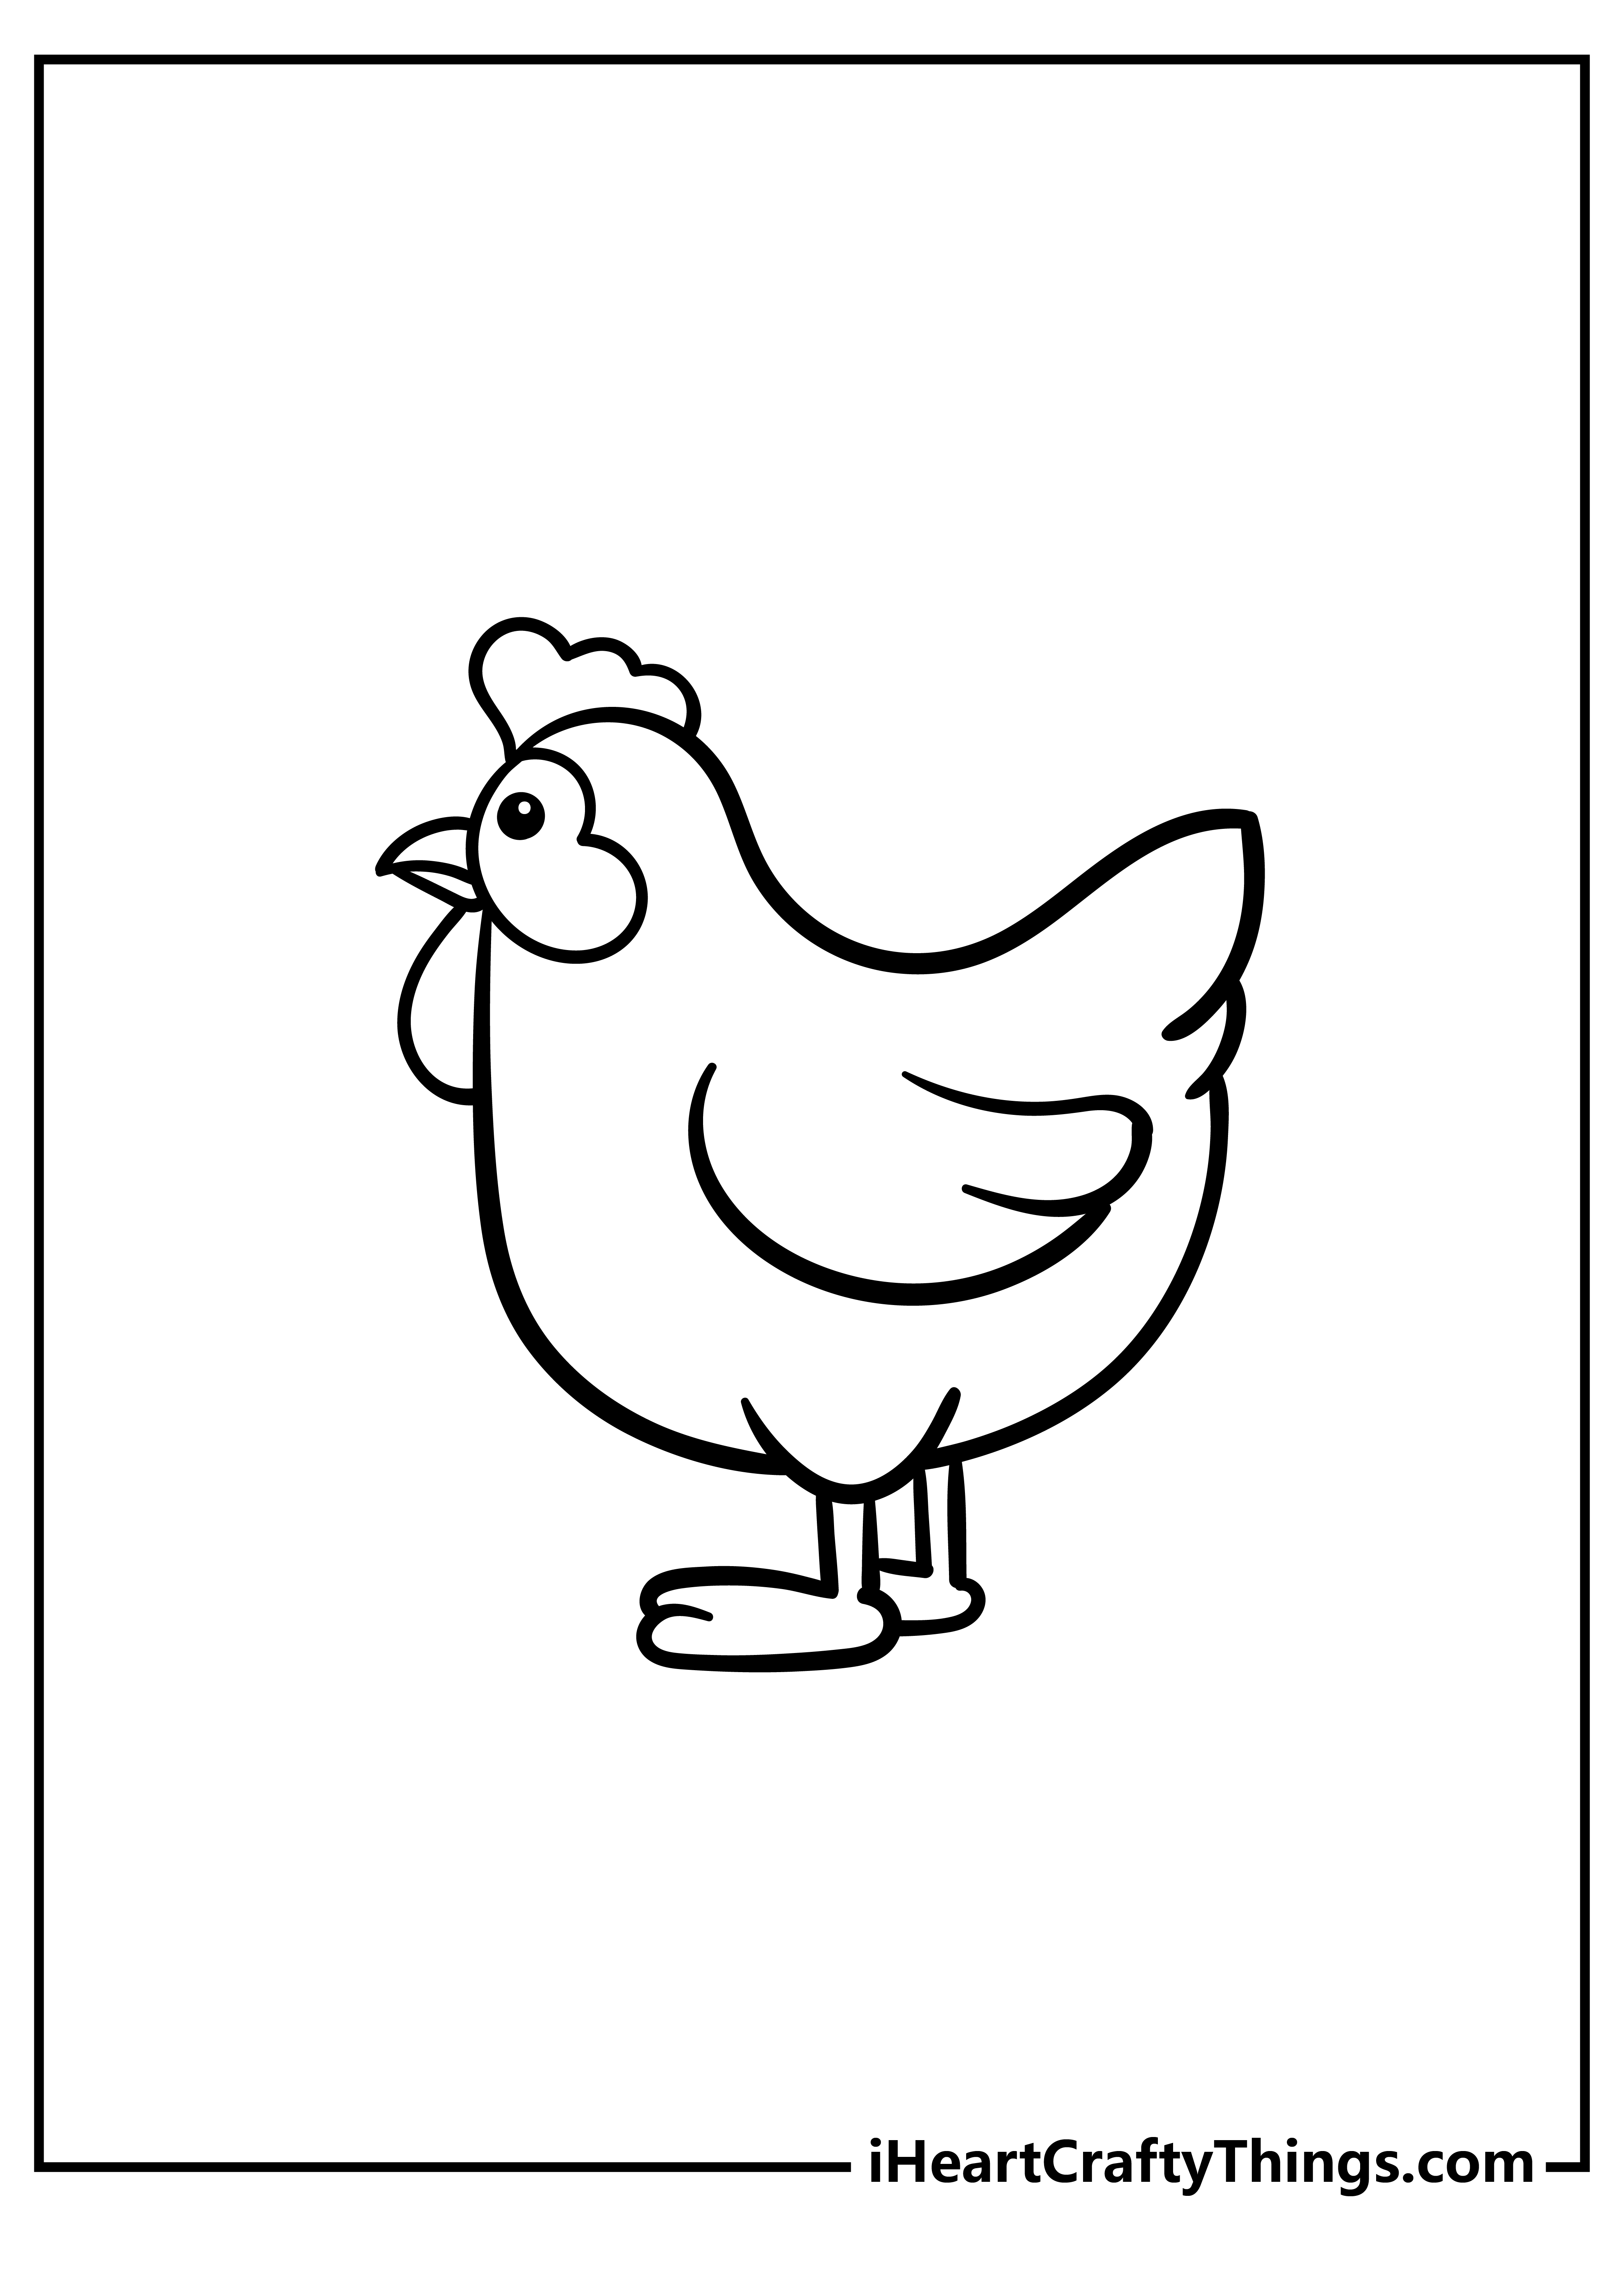 Chicken Coloring Pages free pdf download